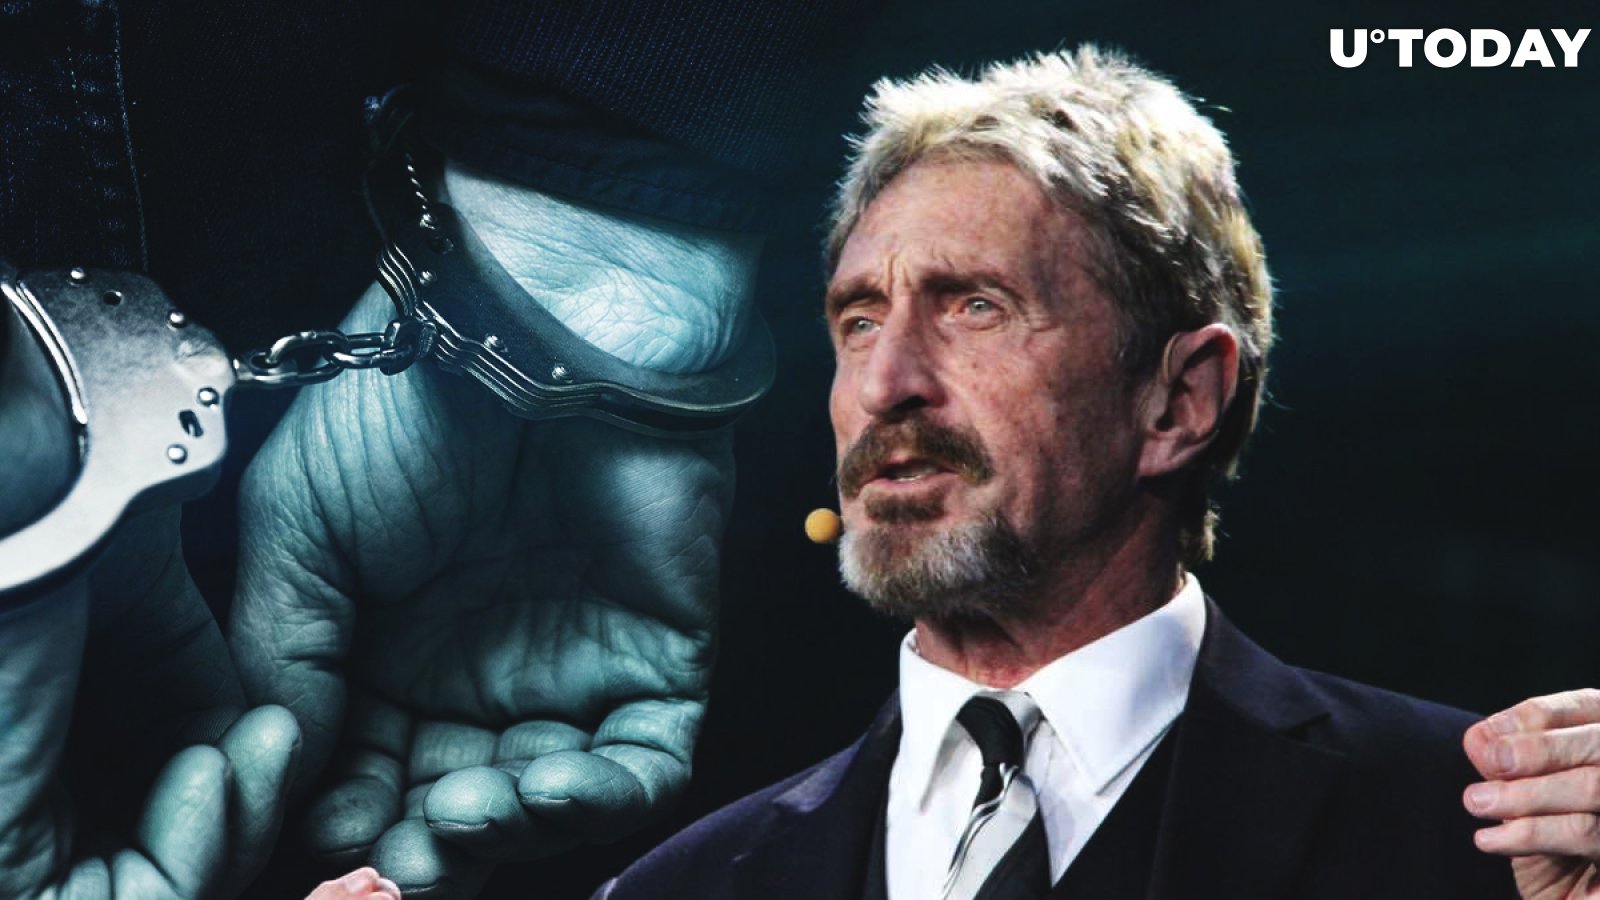 John McAfee Arrested in Spain for Tax Evasion After Earning $23 Mln, Selling Rights to His Bio, Using Nominees' Crypto Accounts